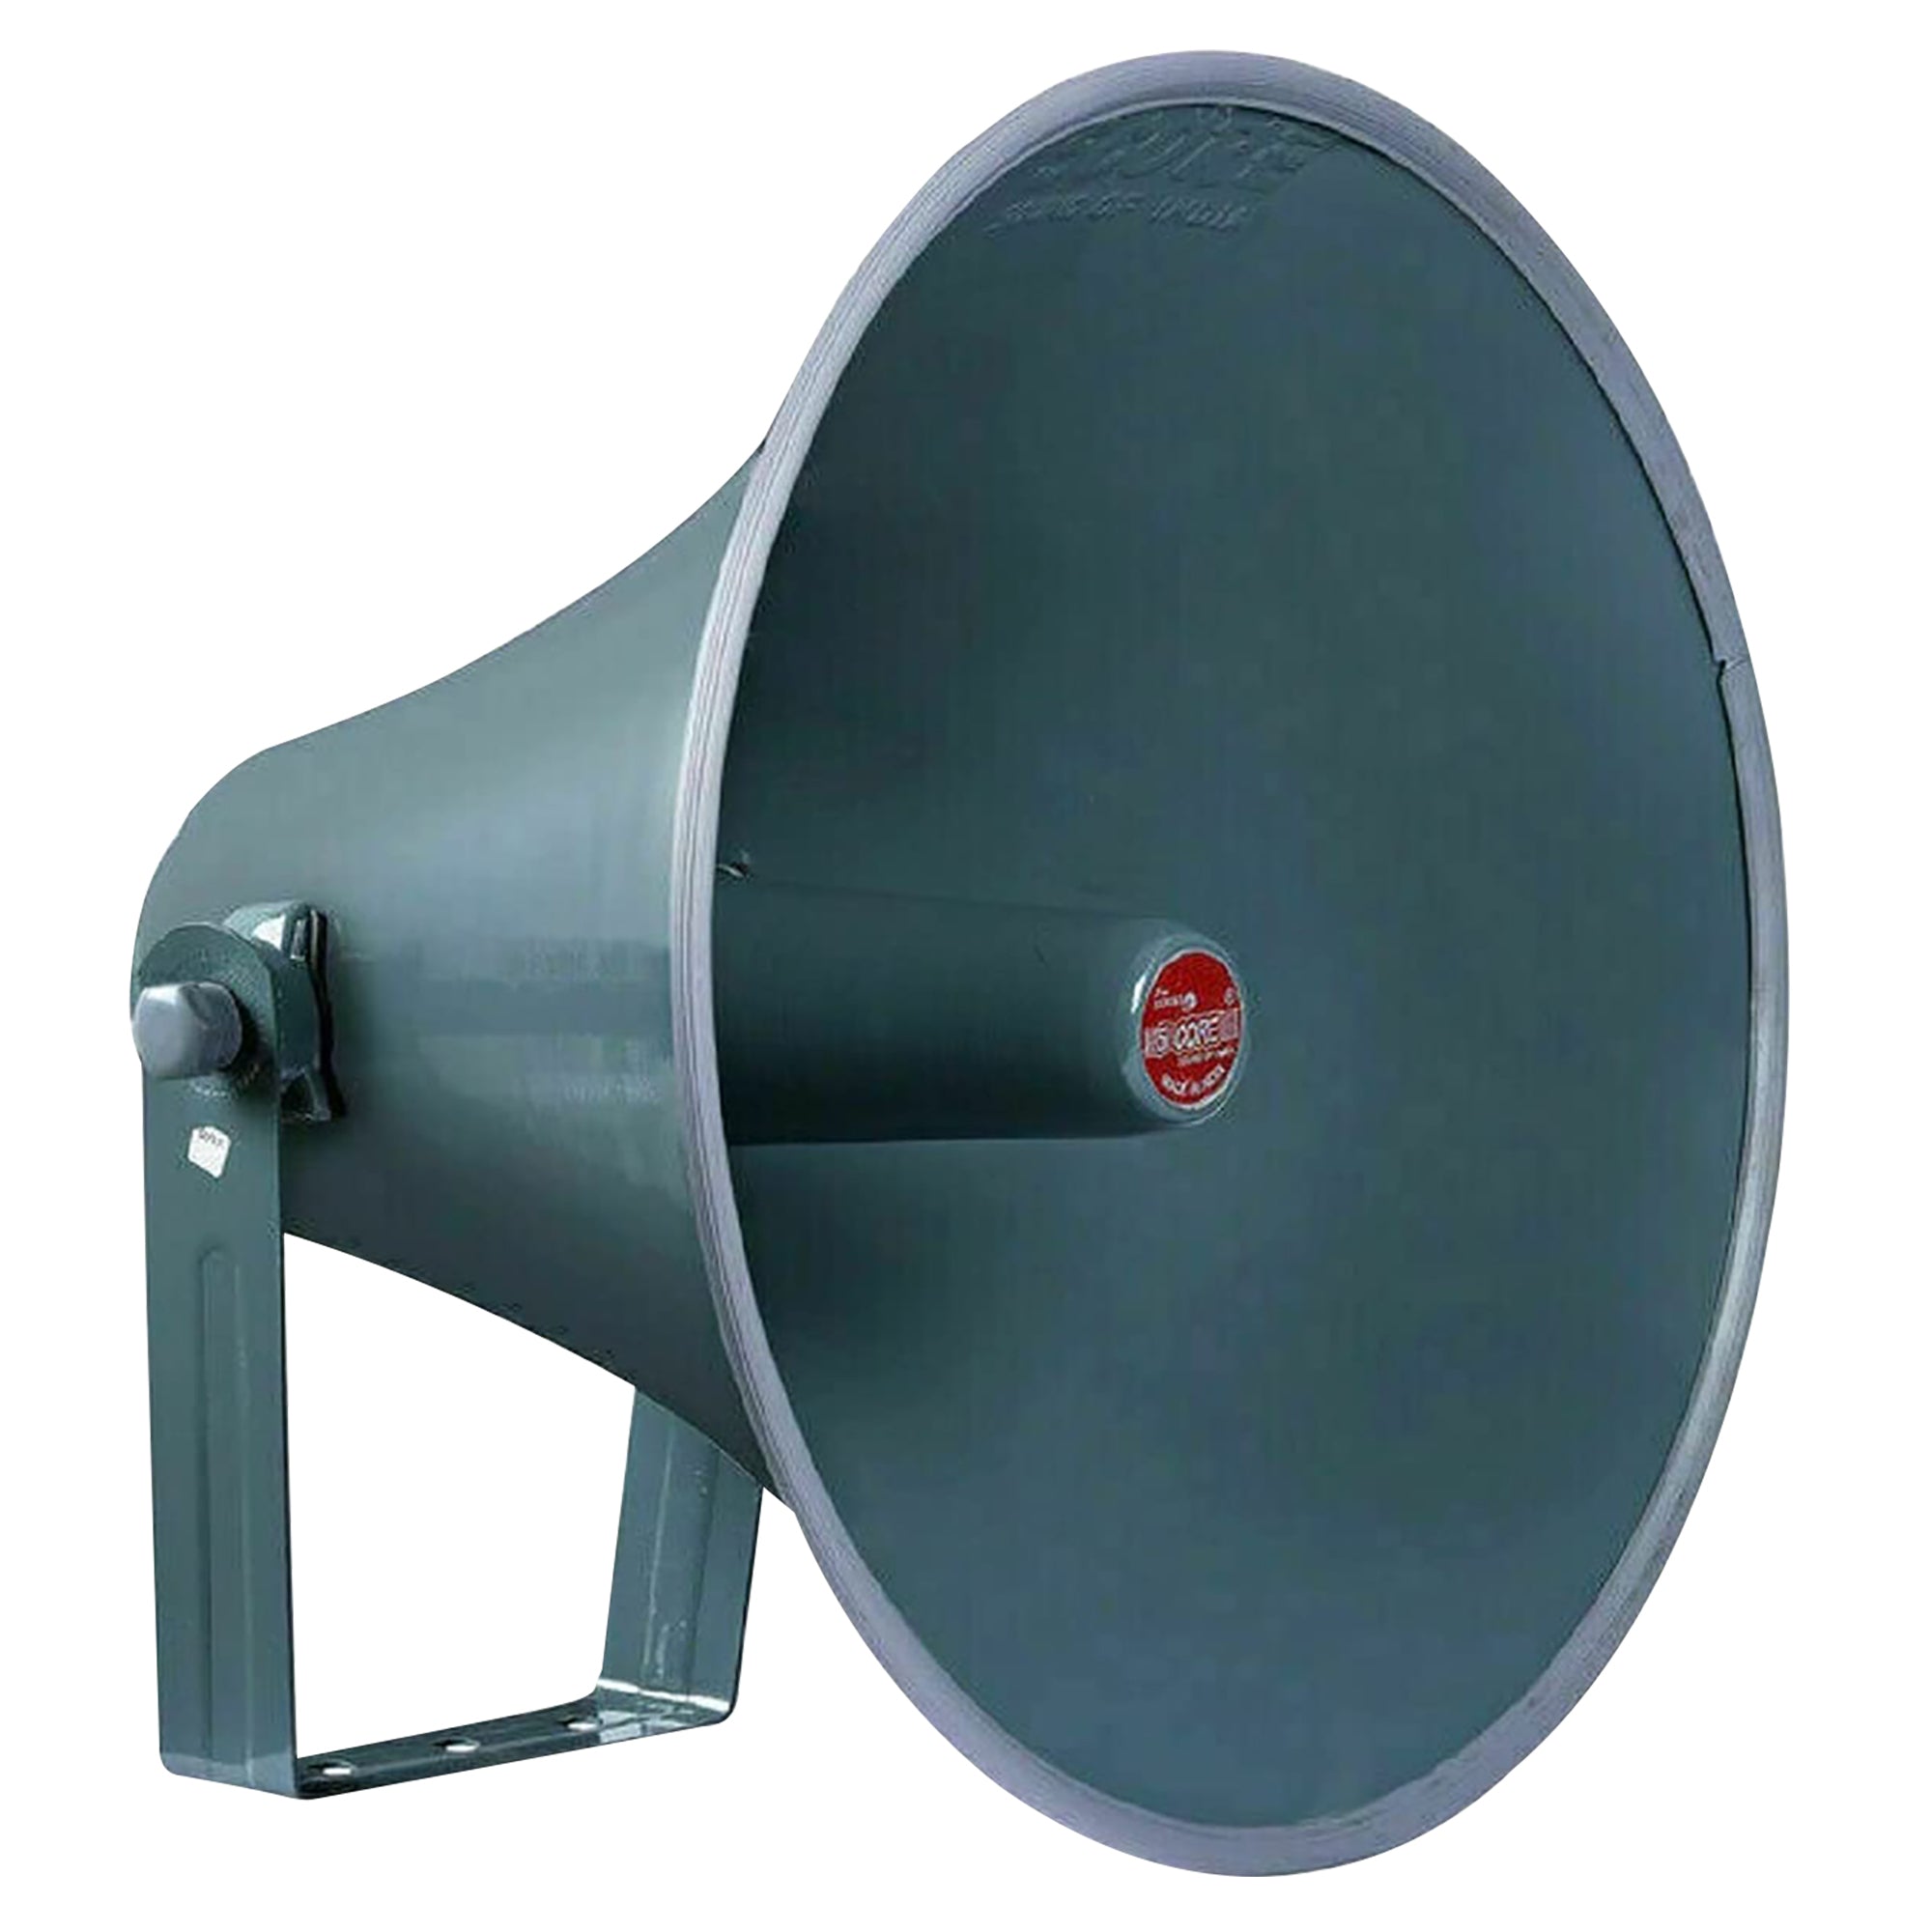 5 CORE PA Speaker Paging Horn Throat 16 inch All Weather Use Support Wide Range of Compression Drivers